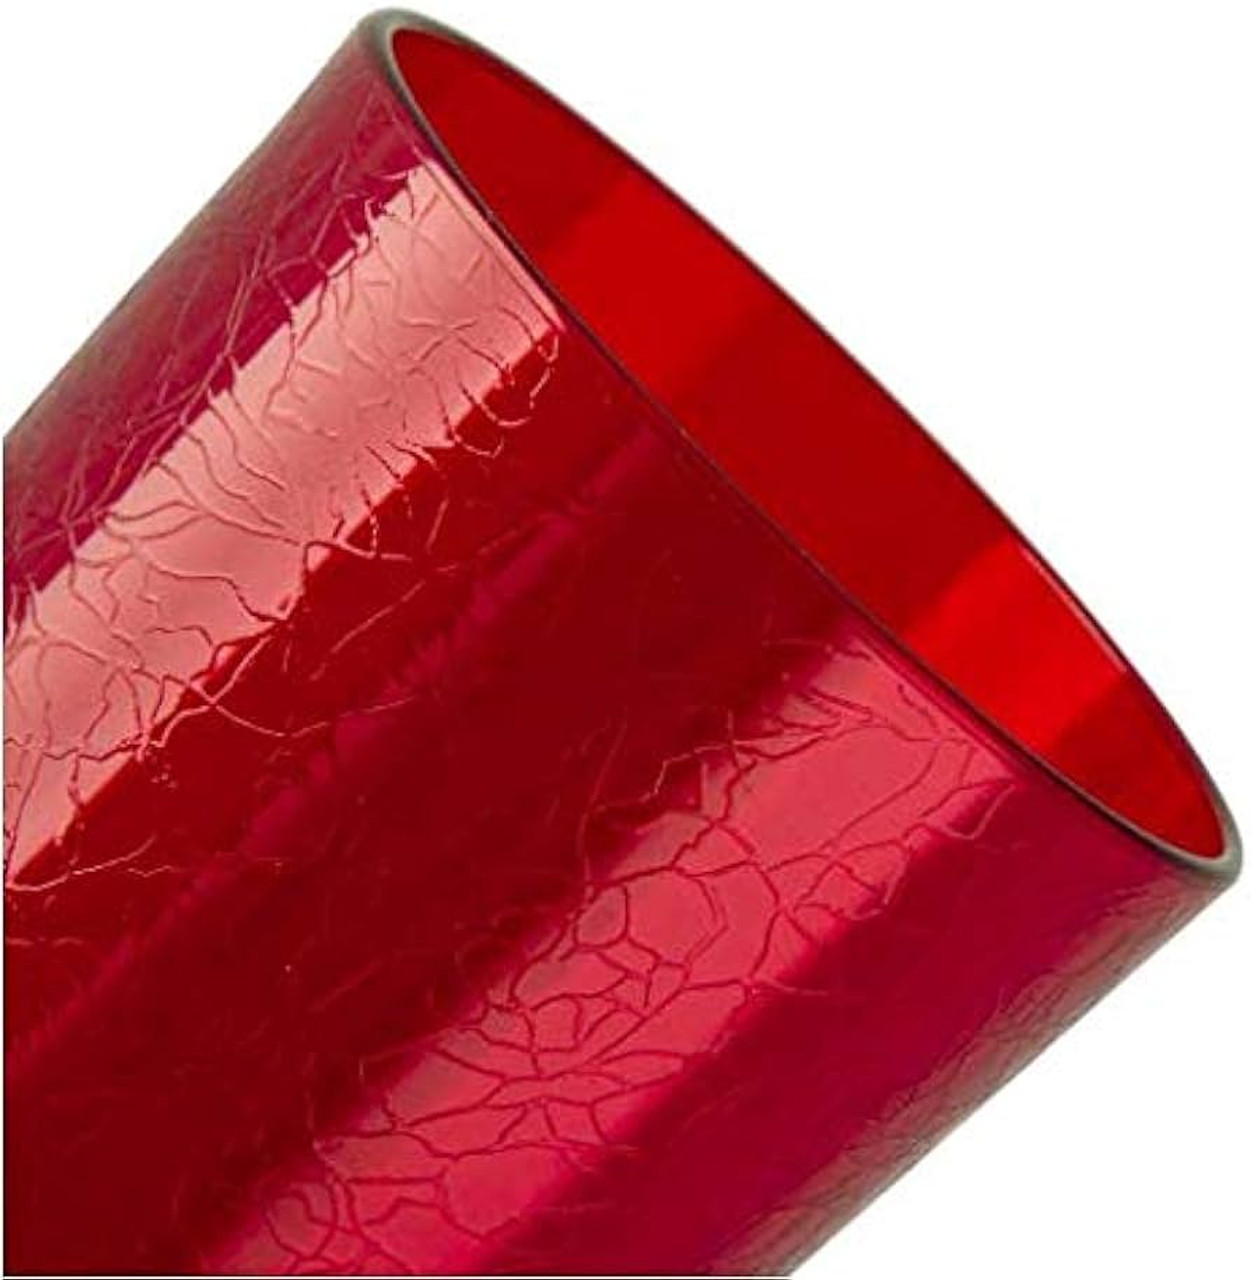 Cambro D24156 24 oz Ruby Red Crackled Plastic Tumbler (36/Case) - Lightweight - Chicken Pieces